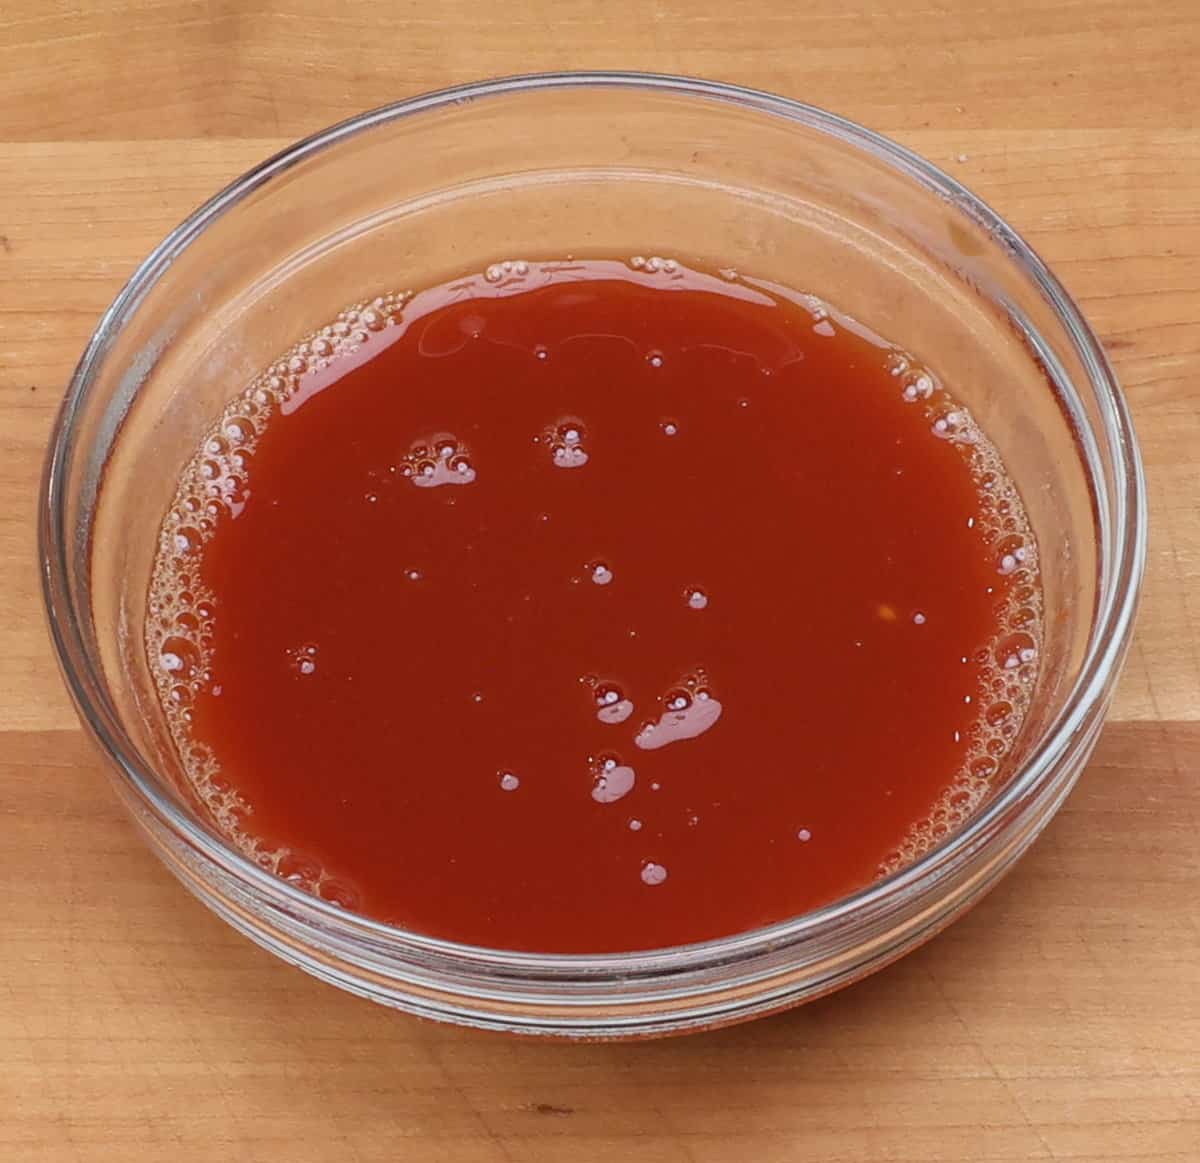 tomato paste and beef broth mixed together in a small bowl.